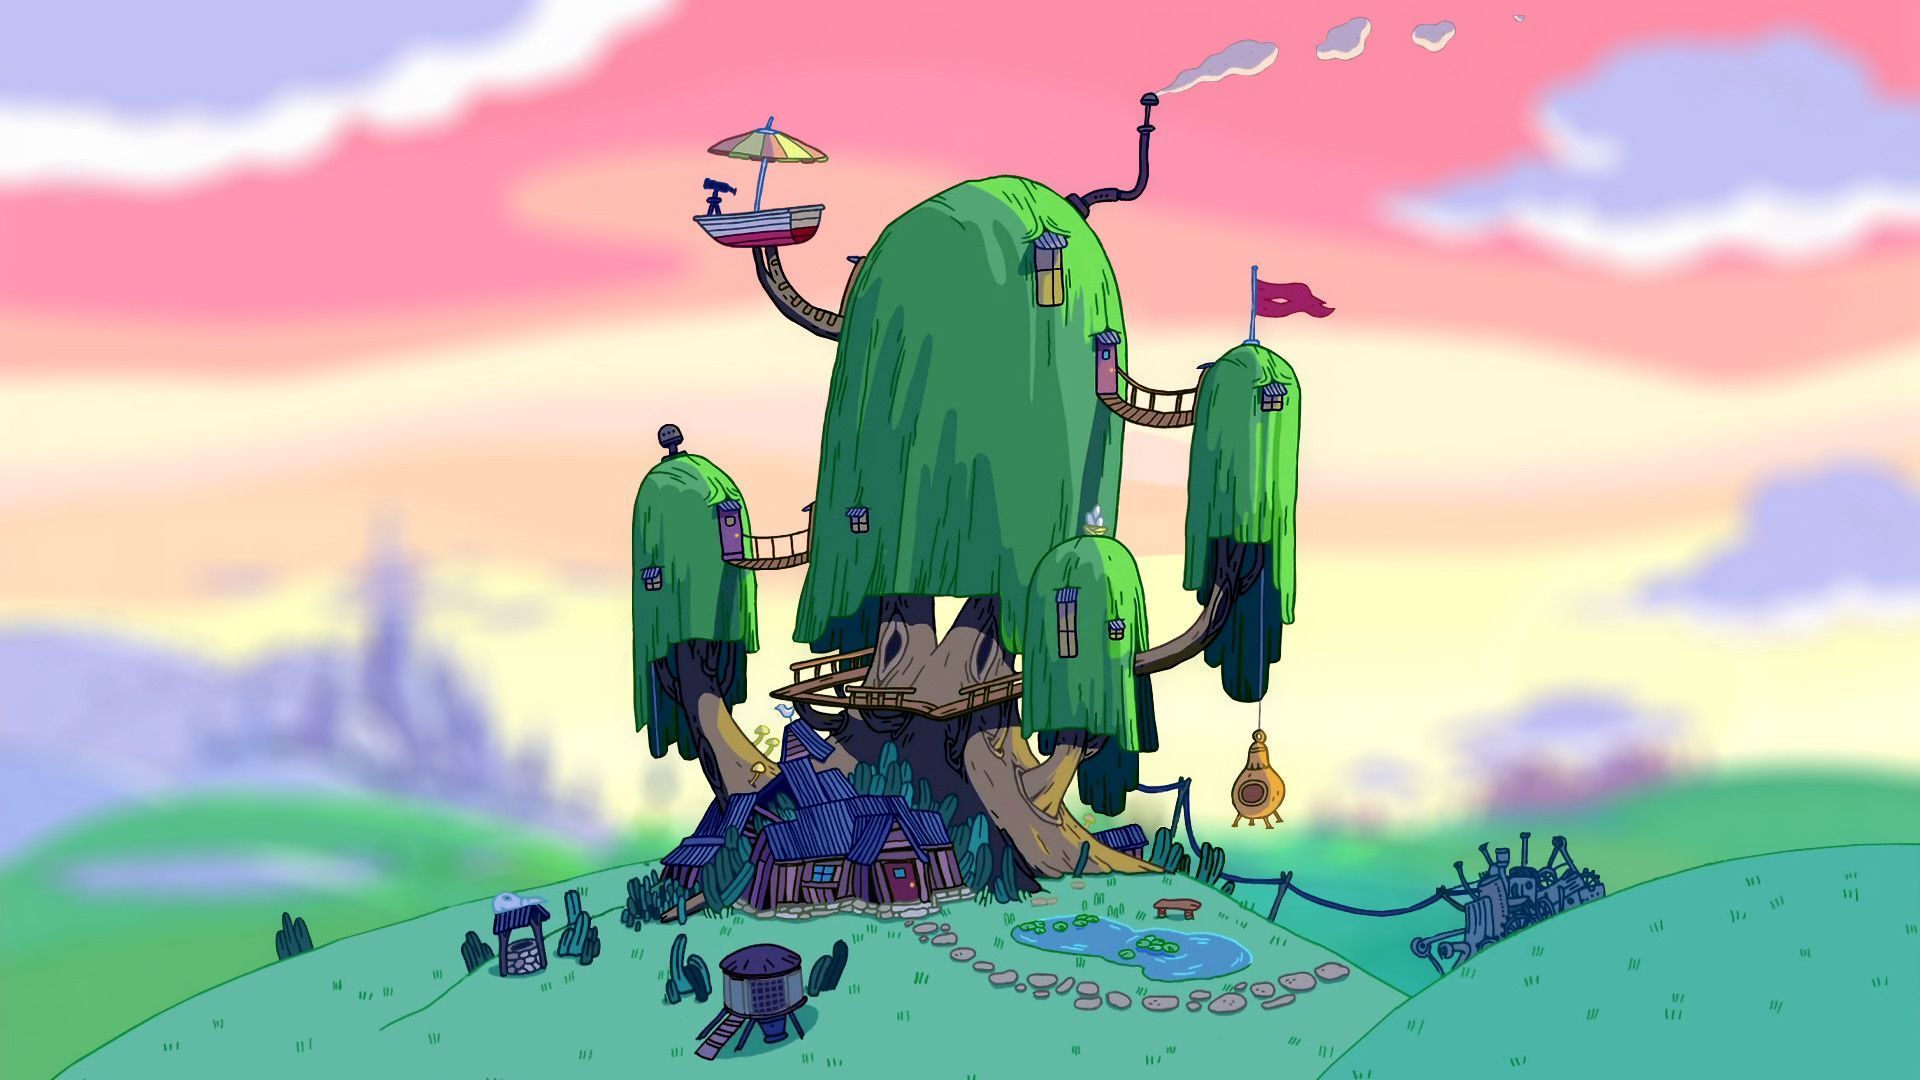 Adventure Time's Finn and Jake's house is a treehouse that looks like a tree. - Adventure Time